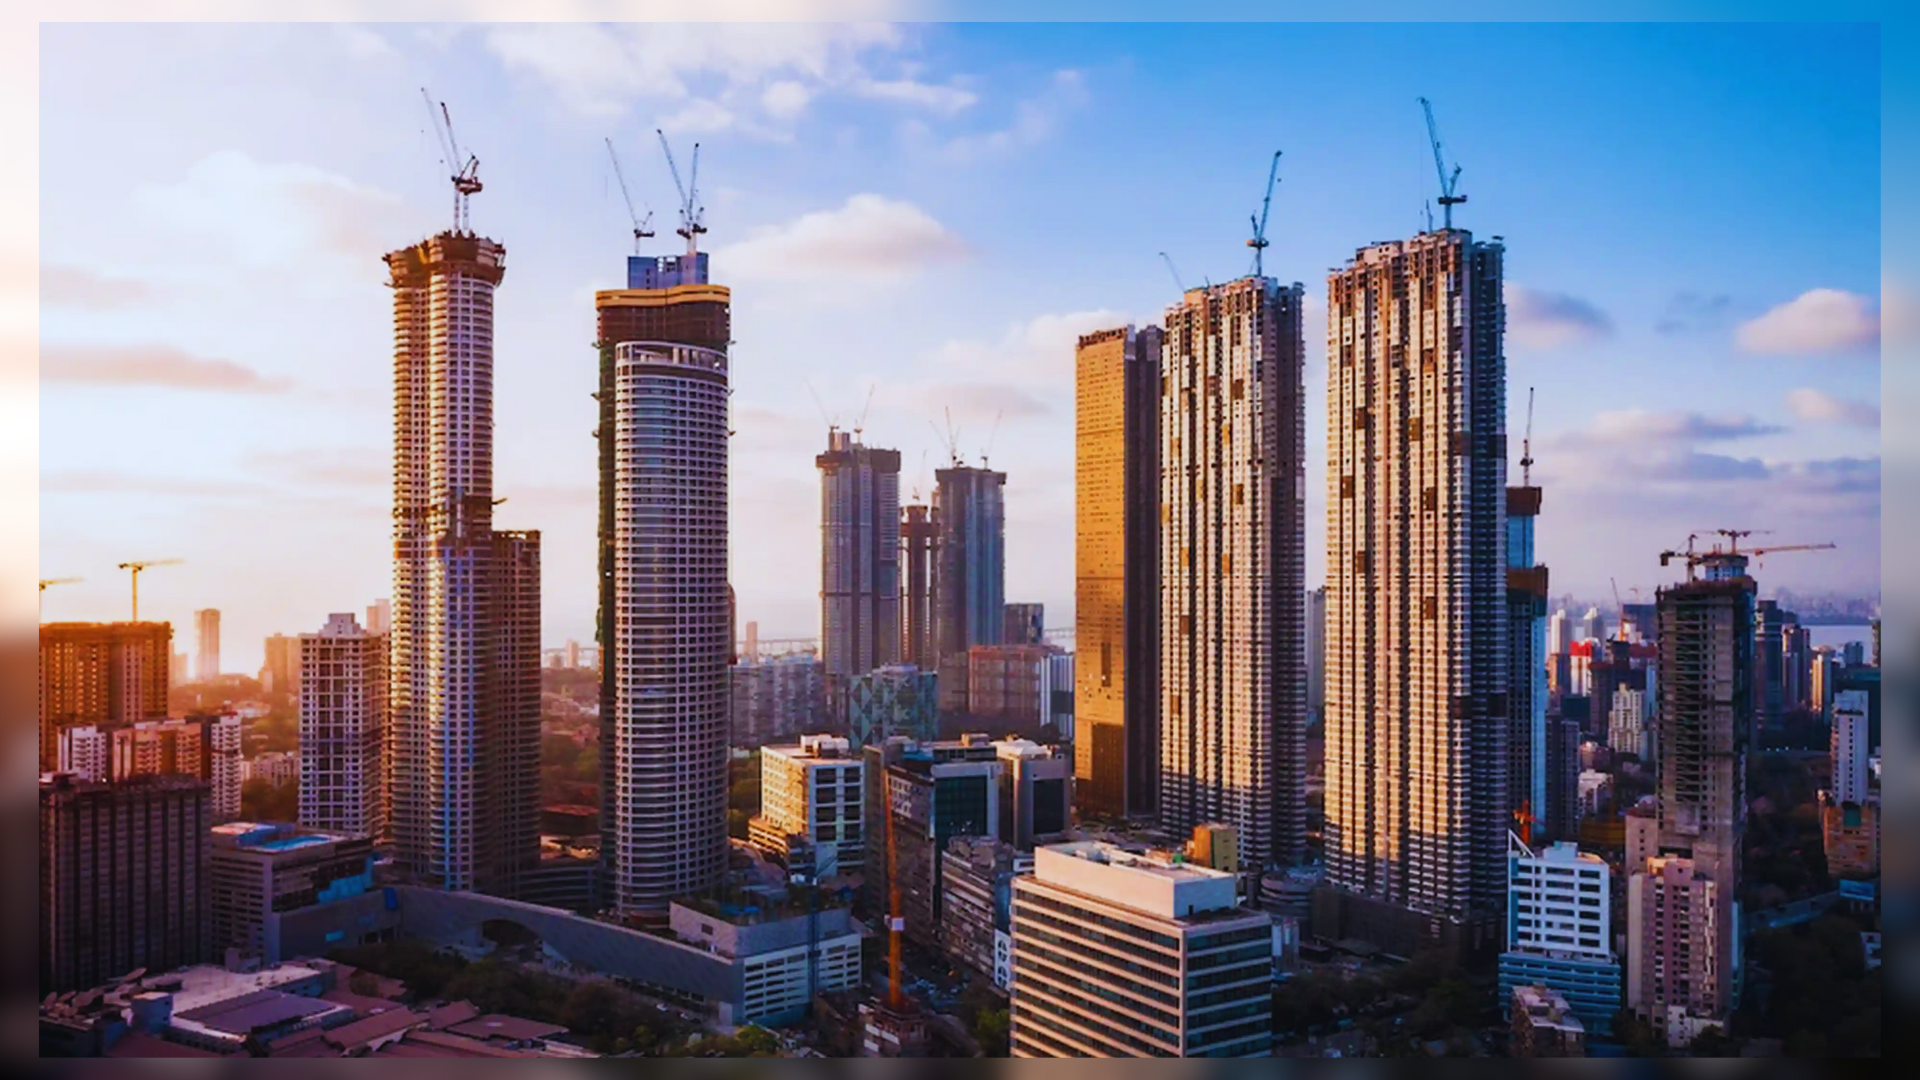 Residential Real Estate Market In India’s Tier-1 Cities: Delhi-NCR Leads with 95% Surge In New Launches, Hyderabad And Pune Experience Declines: Report